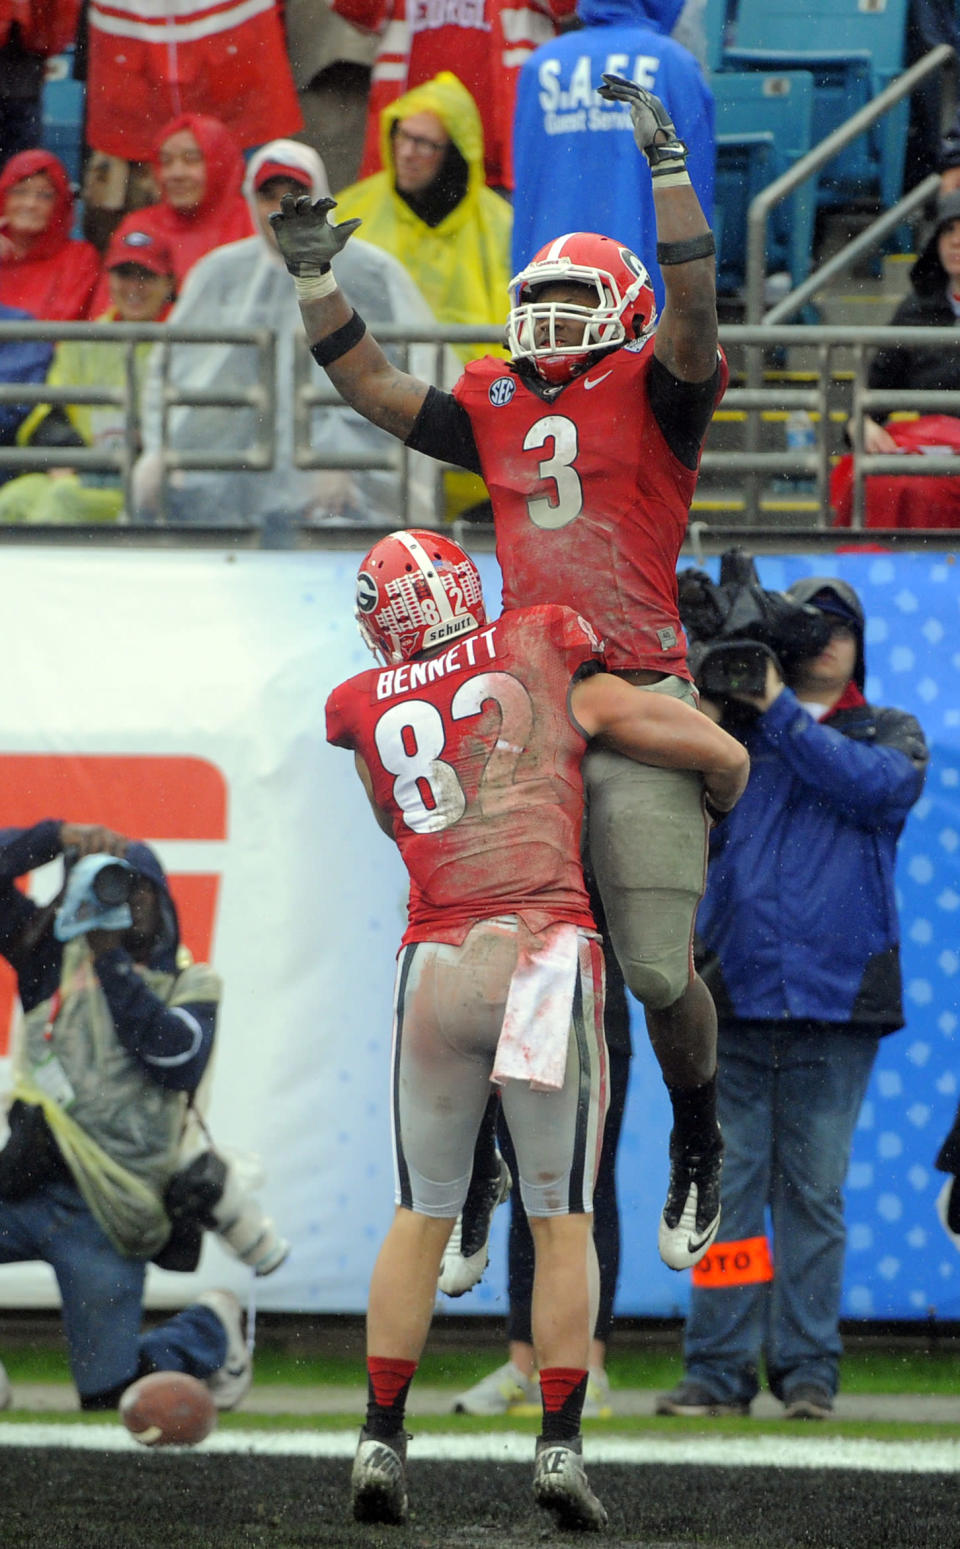 Georgia running back Todd Gurley (3) celebrates a touchdown with wide receiver Michael Bennett (82) during the second half of the Gator Bowl NCAA college football game against Nebraska, Wednesday, Jan. 1, 2014, in Jacksonville, Fla. (AP Photo/Stephen B. Morton)